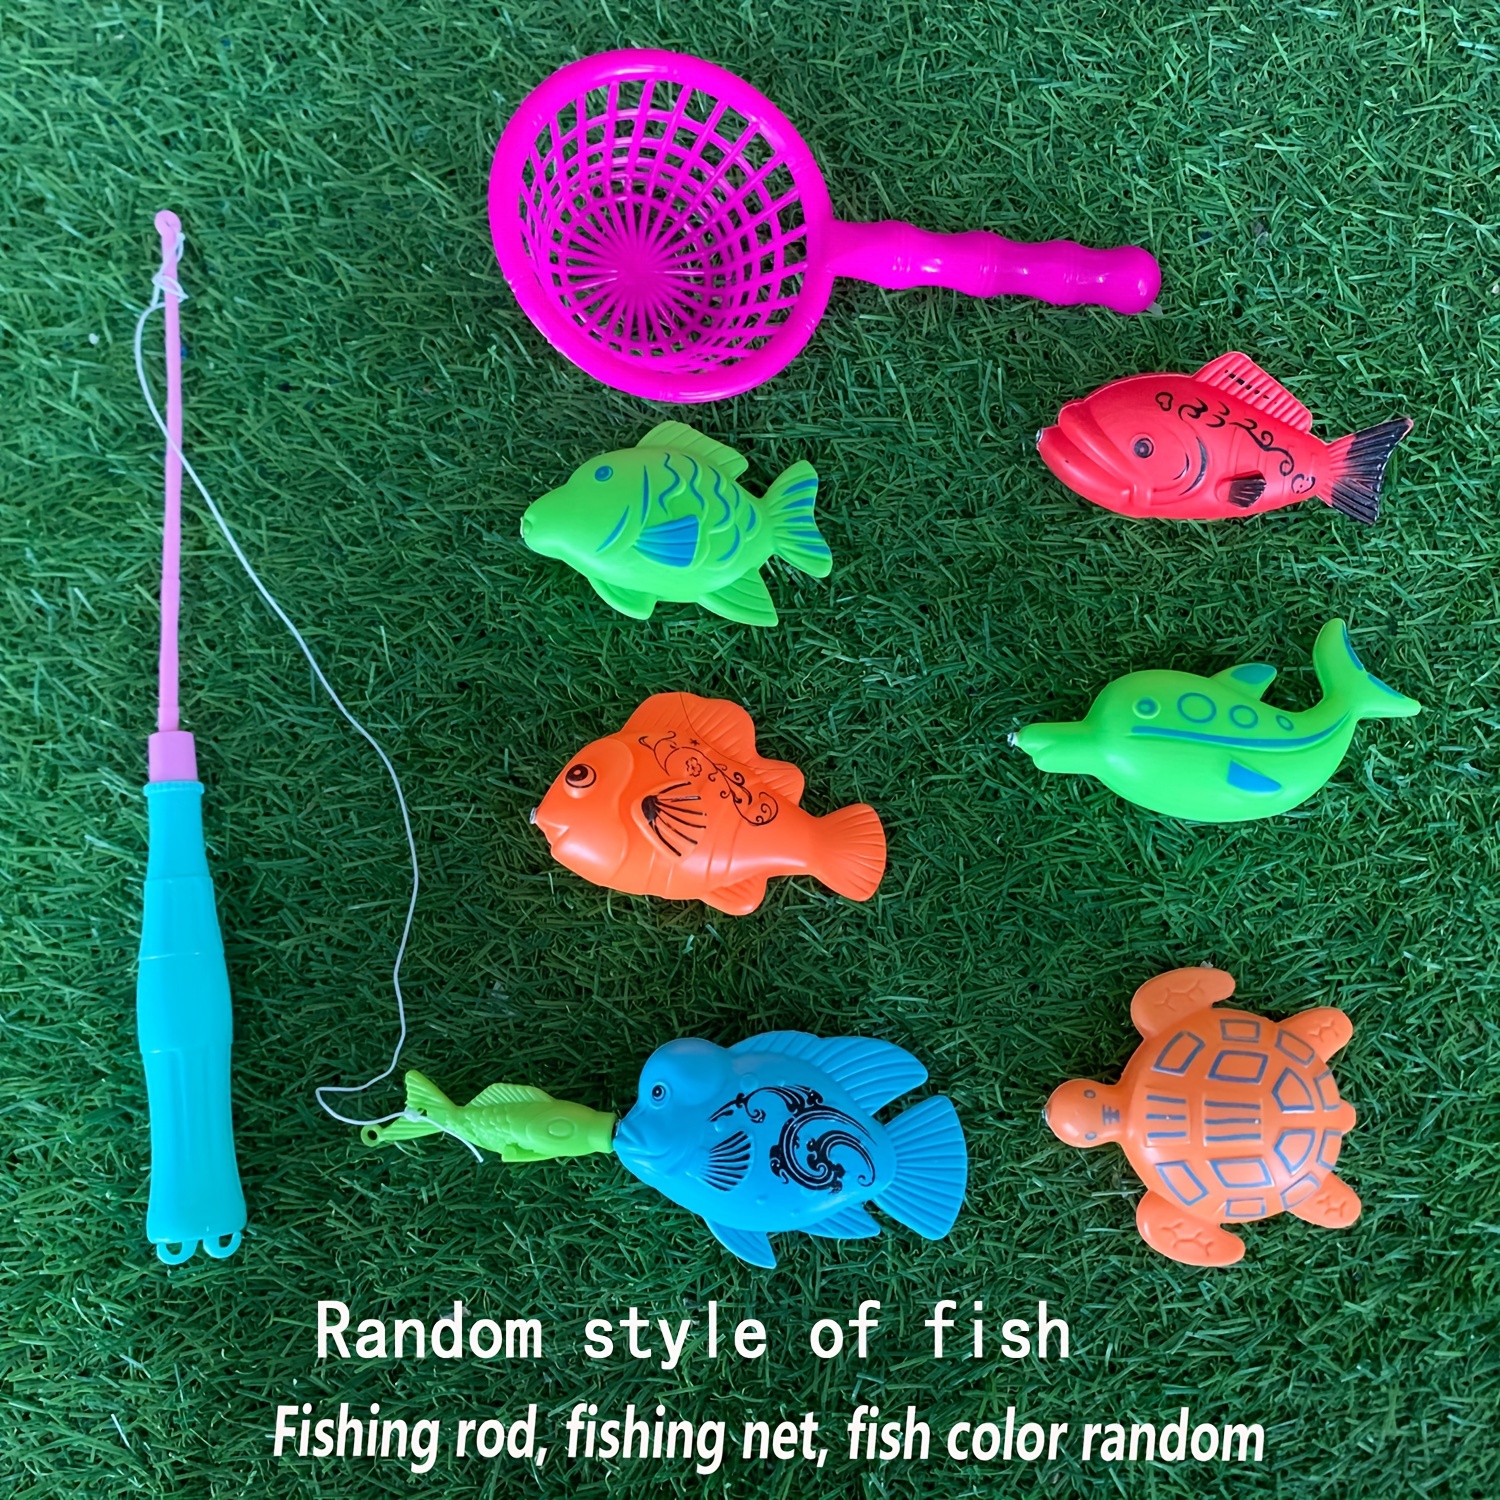 Table Bathtub Kiddie Party Toy With Pole Rod Net Plastic Floating Fish  Construction Magnets for Toddlers Games for Kids 35 - AliExpress